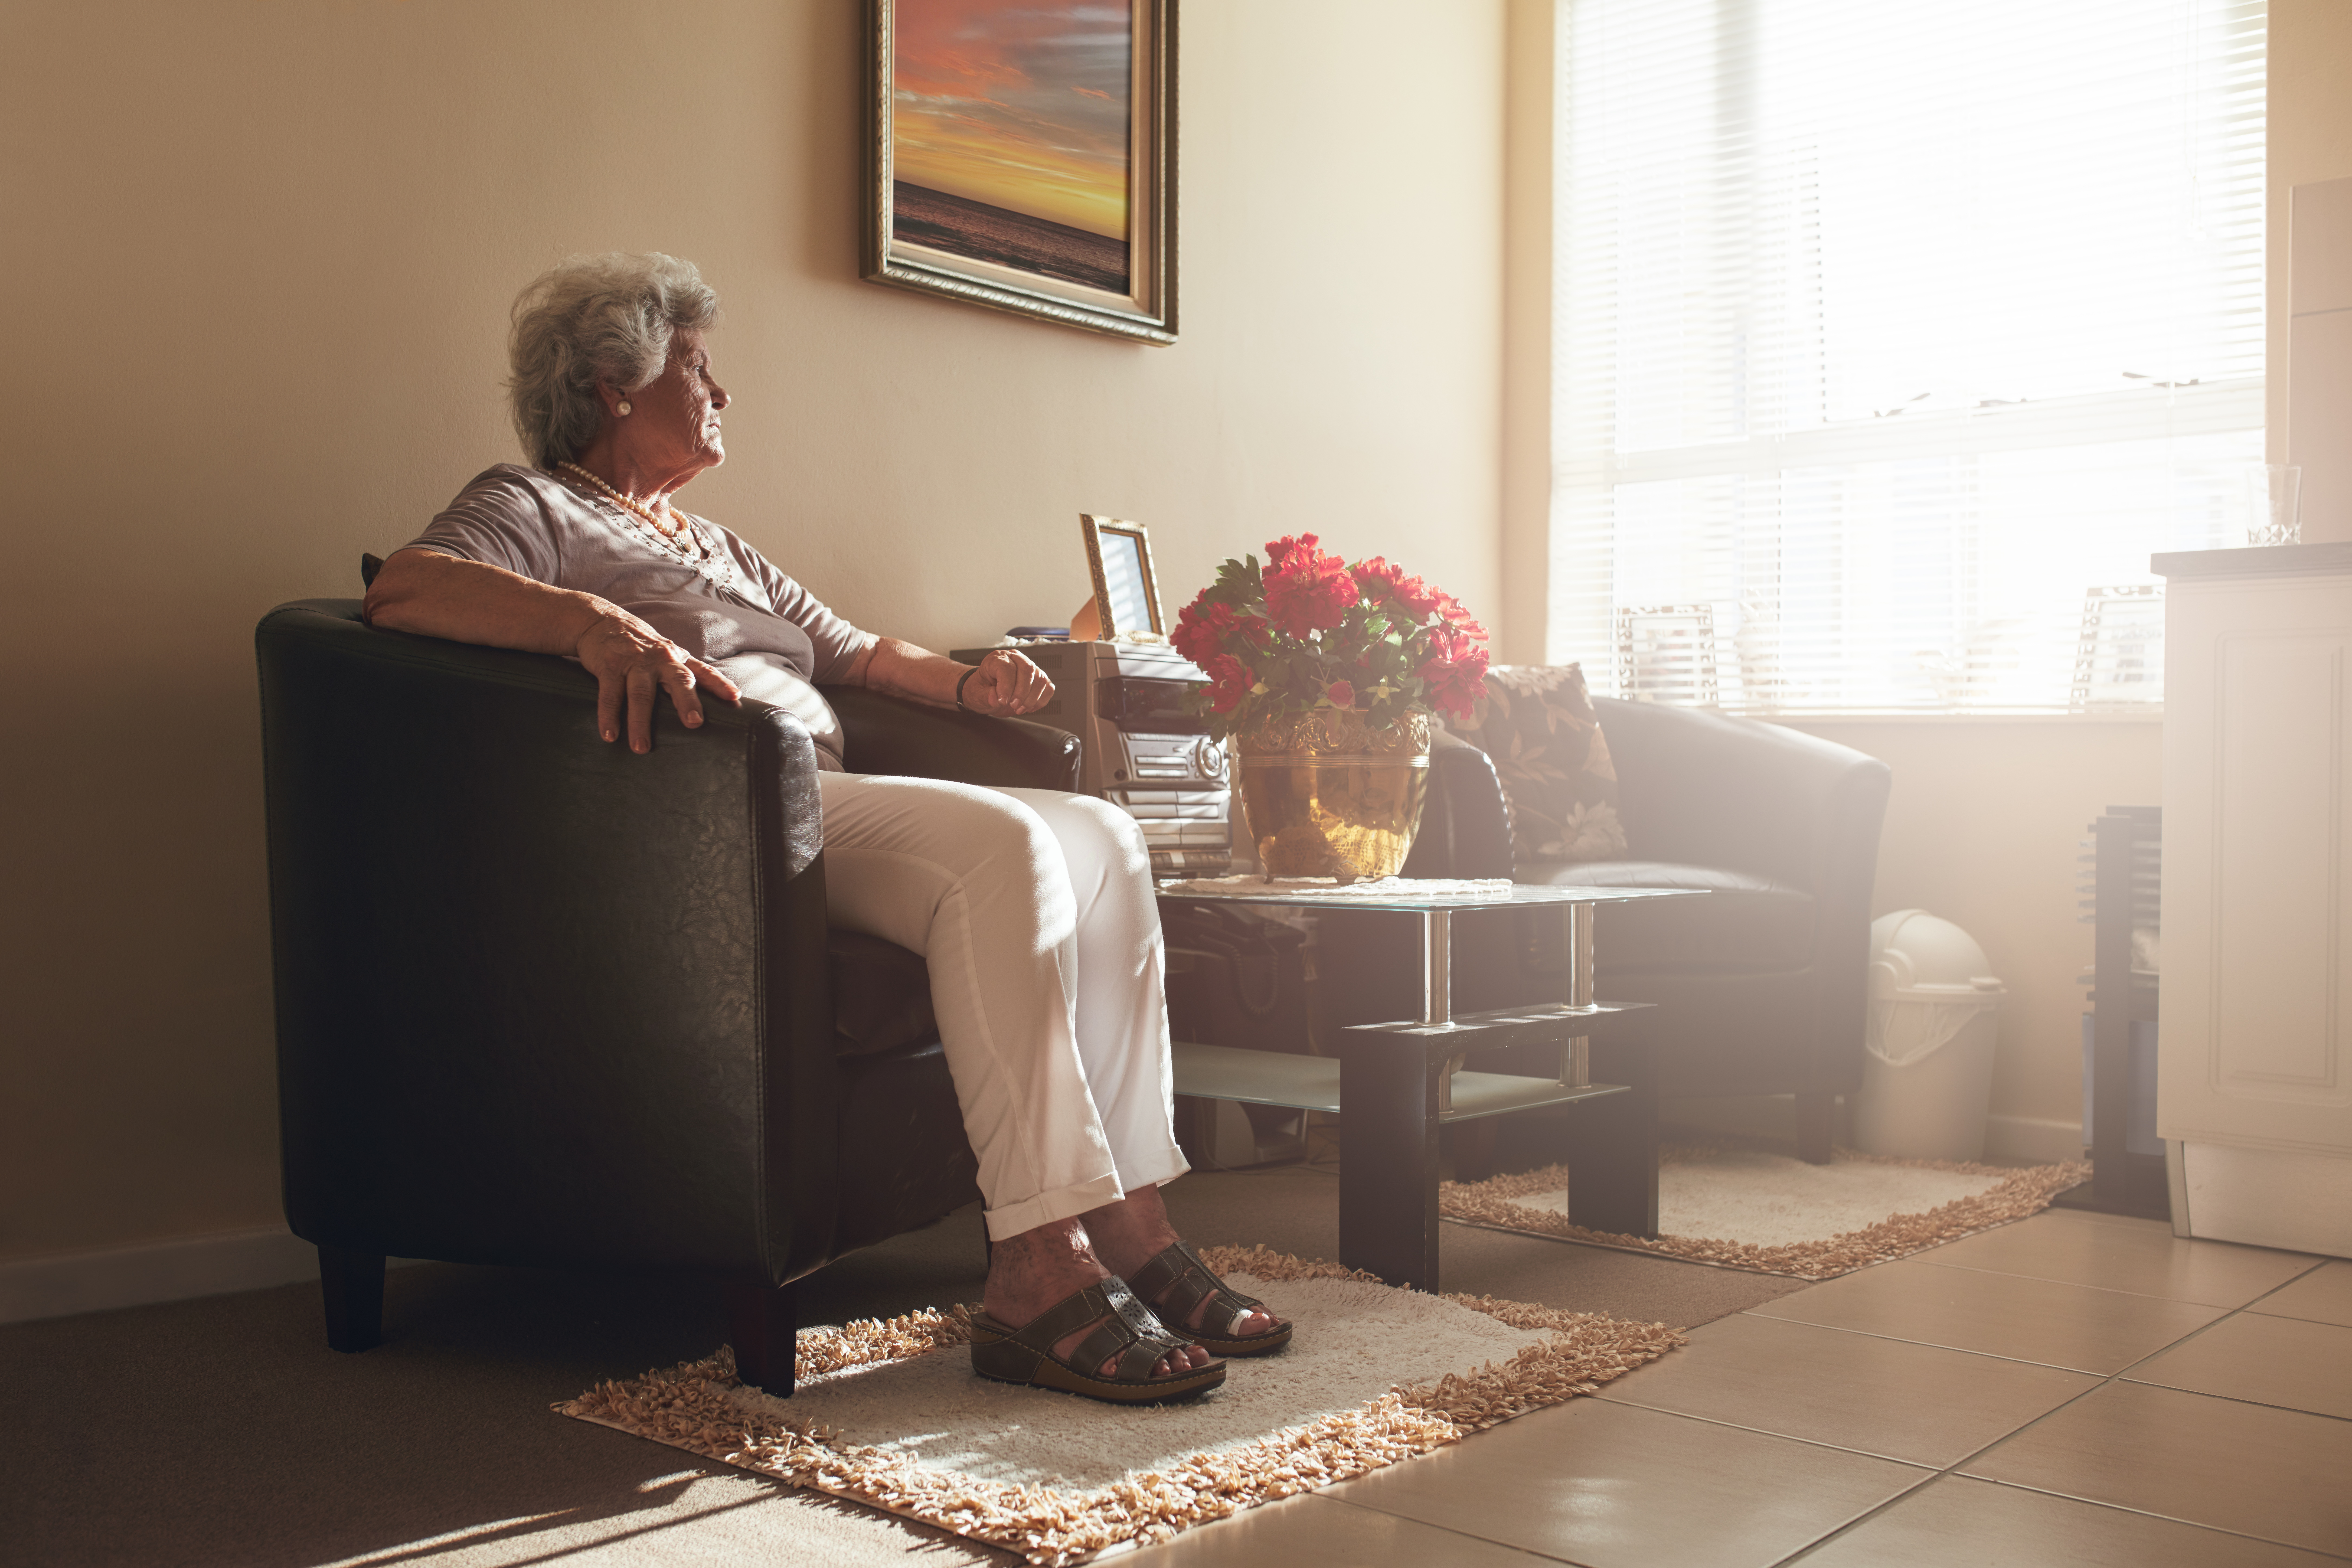 The Importance of Social Connections for Seniors